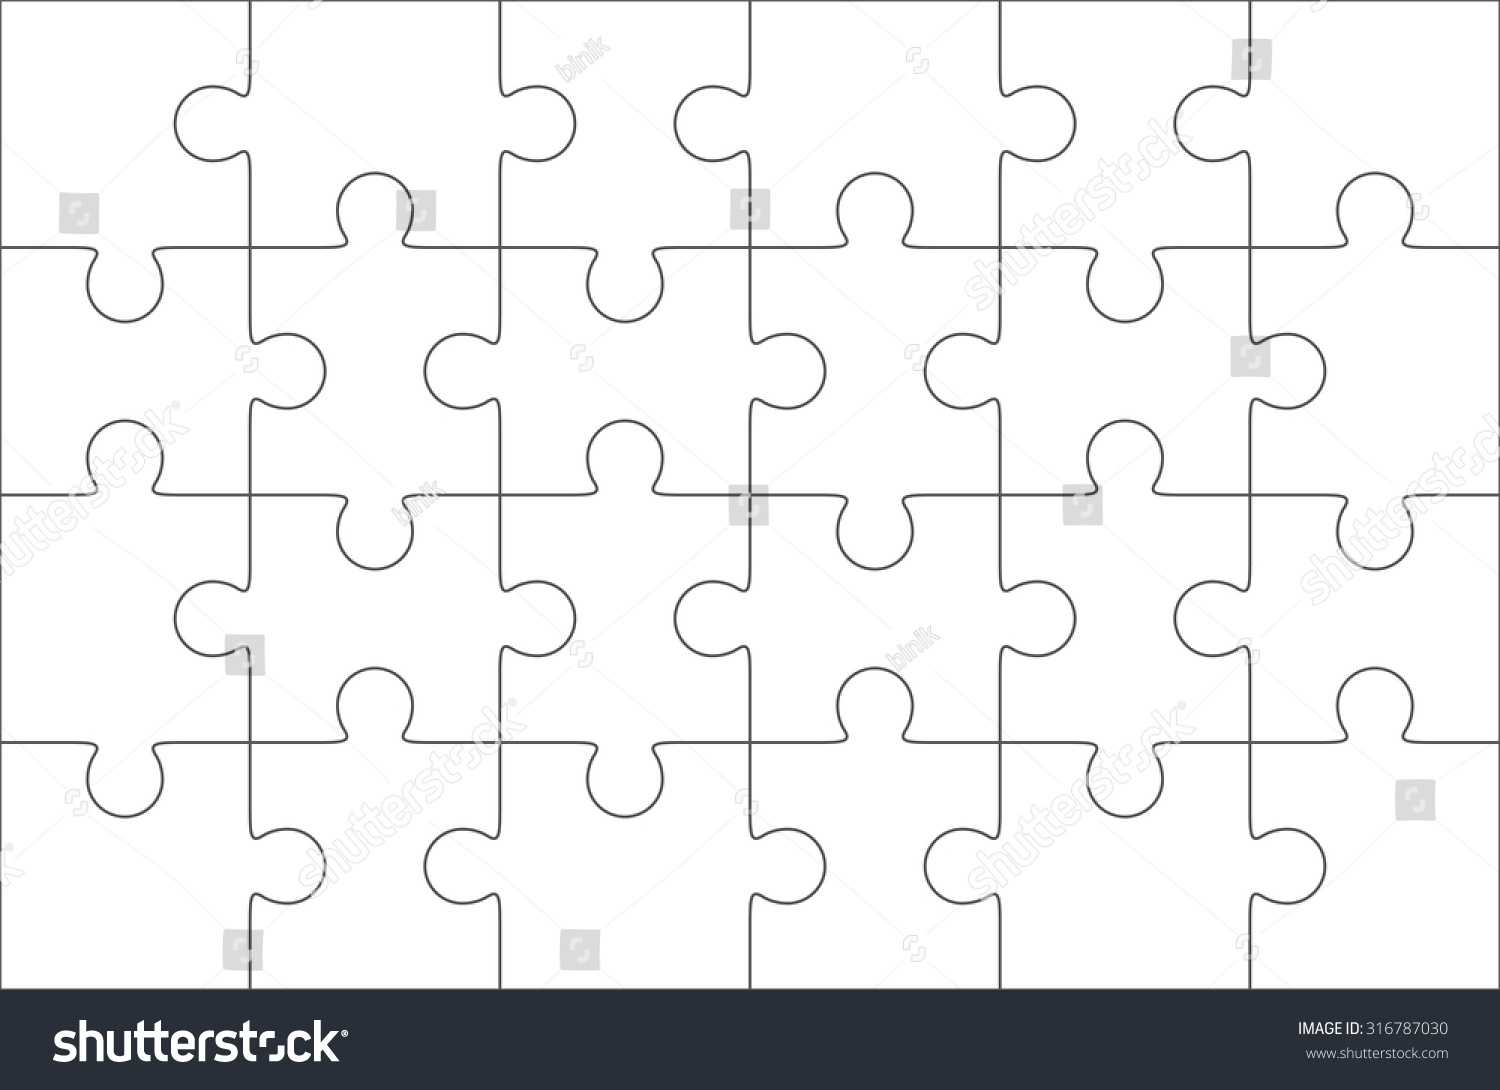 Jigsaw Puzzle Blank Template 6X4 Elements Stock Vector Within Blank Jigsaw Piece Template